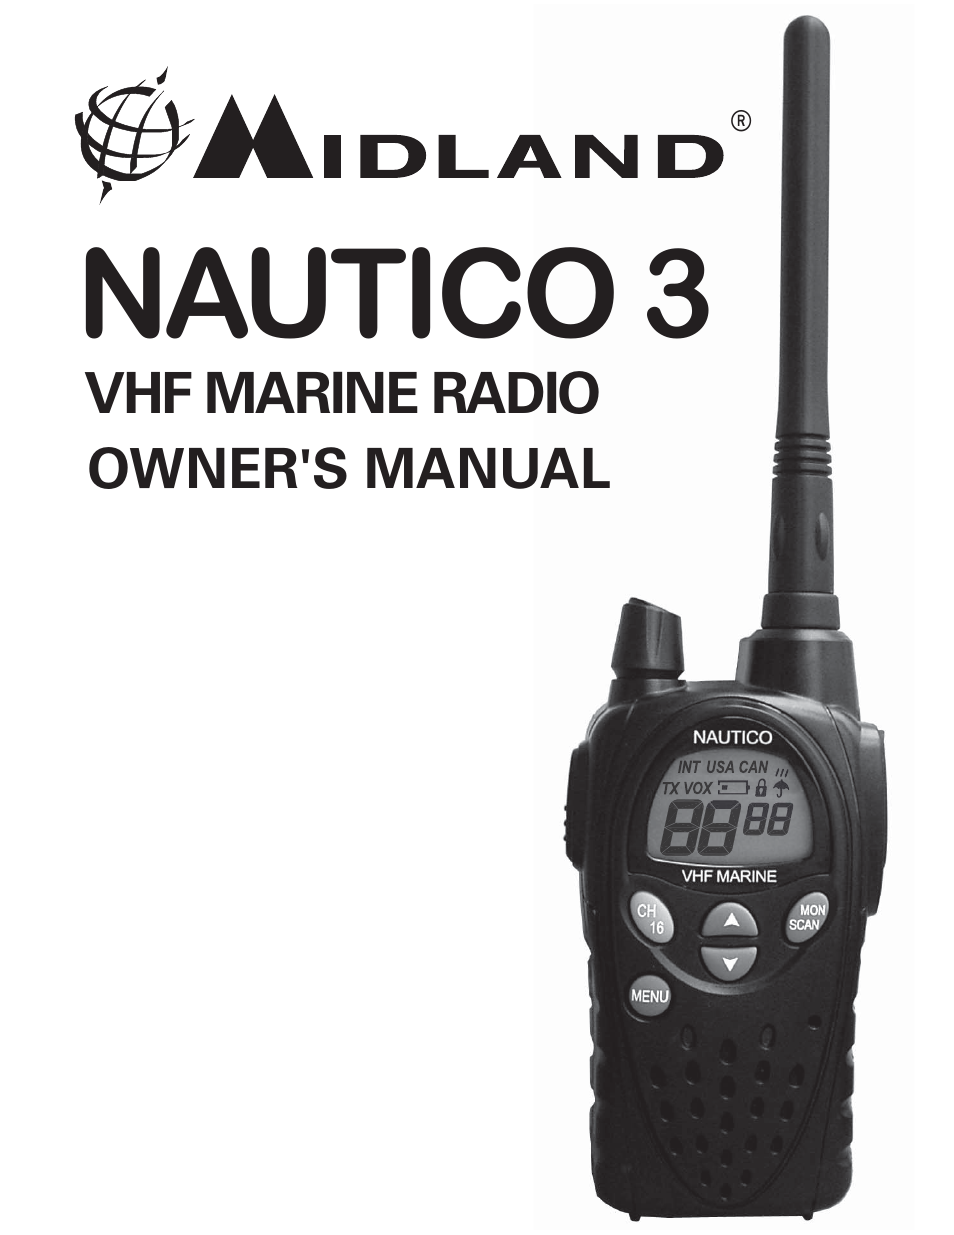 Midland Radio NAUTICO 3 User Manual | 20 pages | Also for: NT3 Series